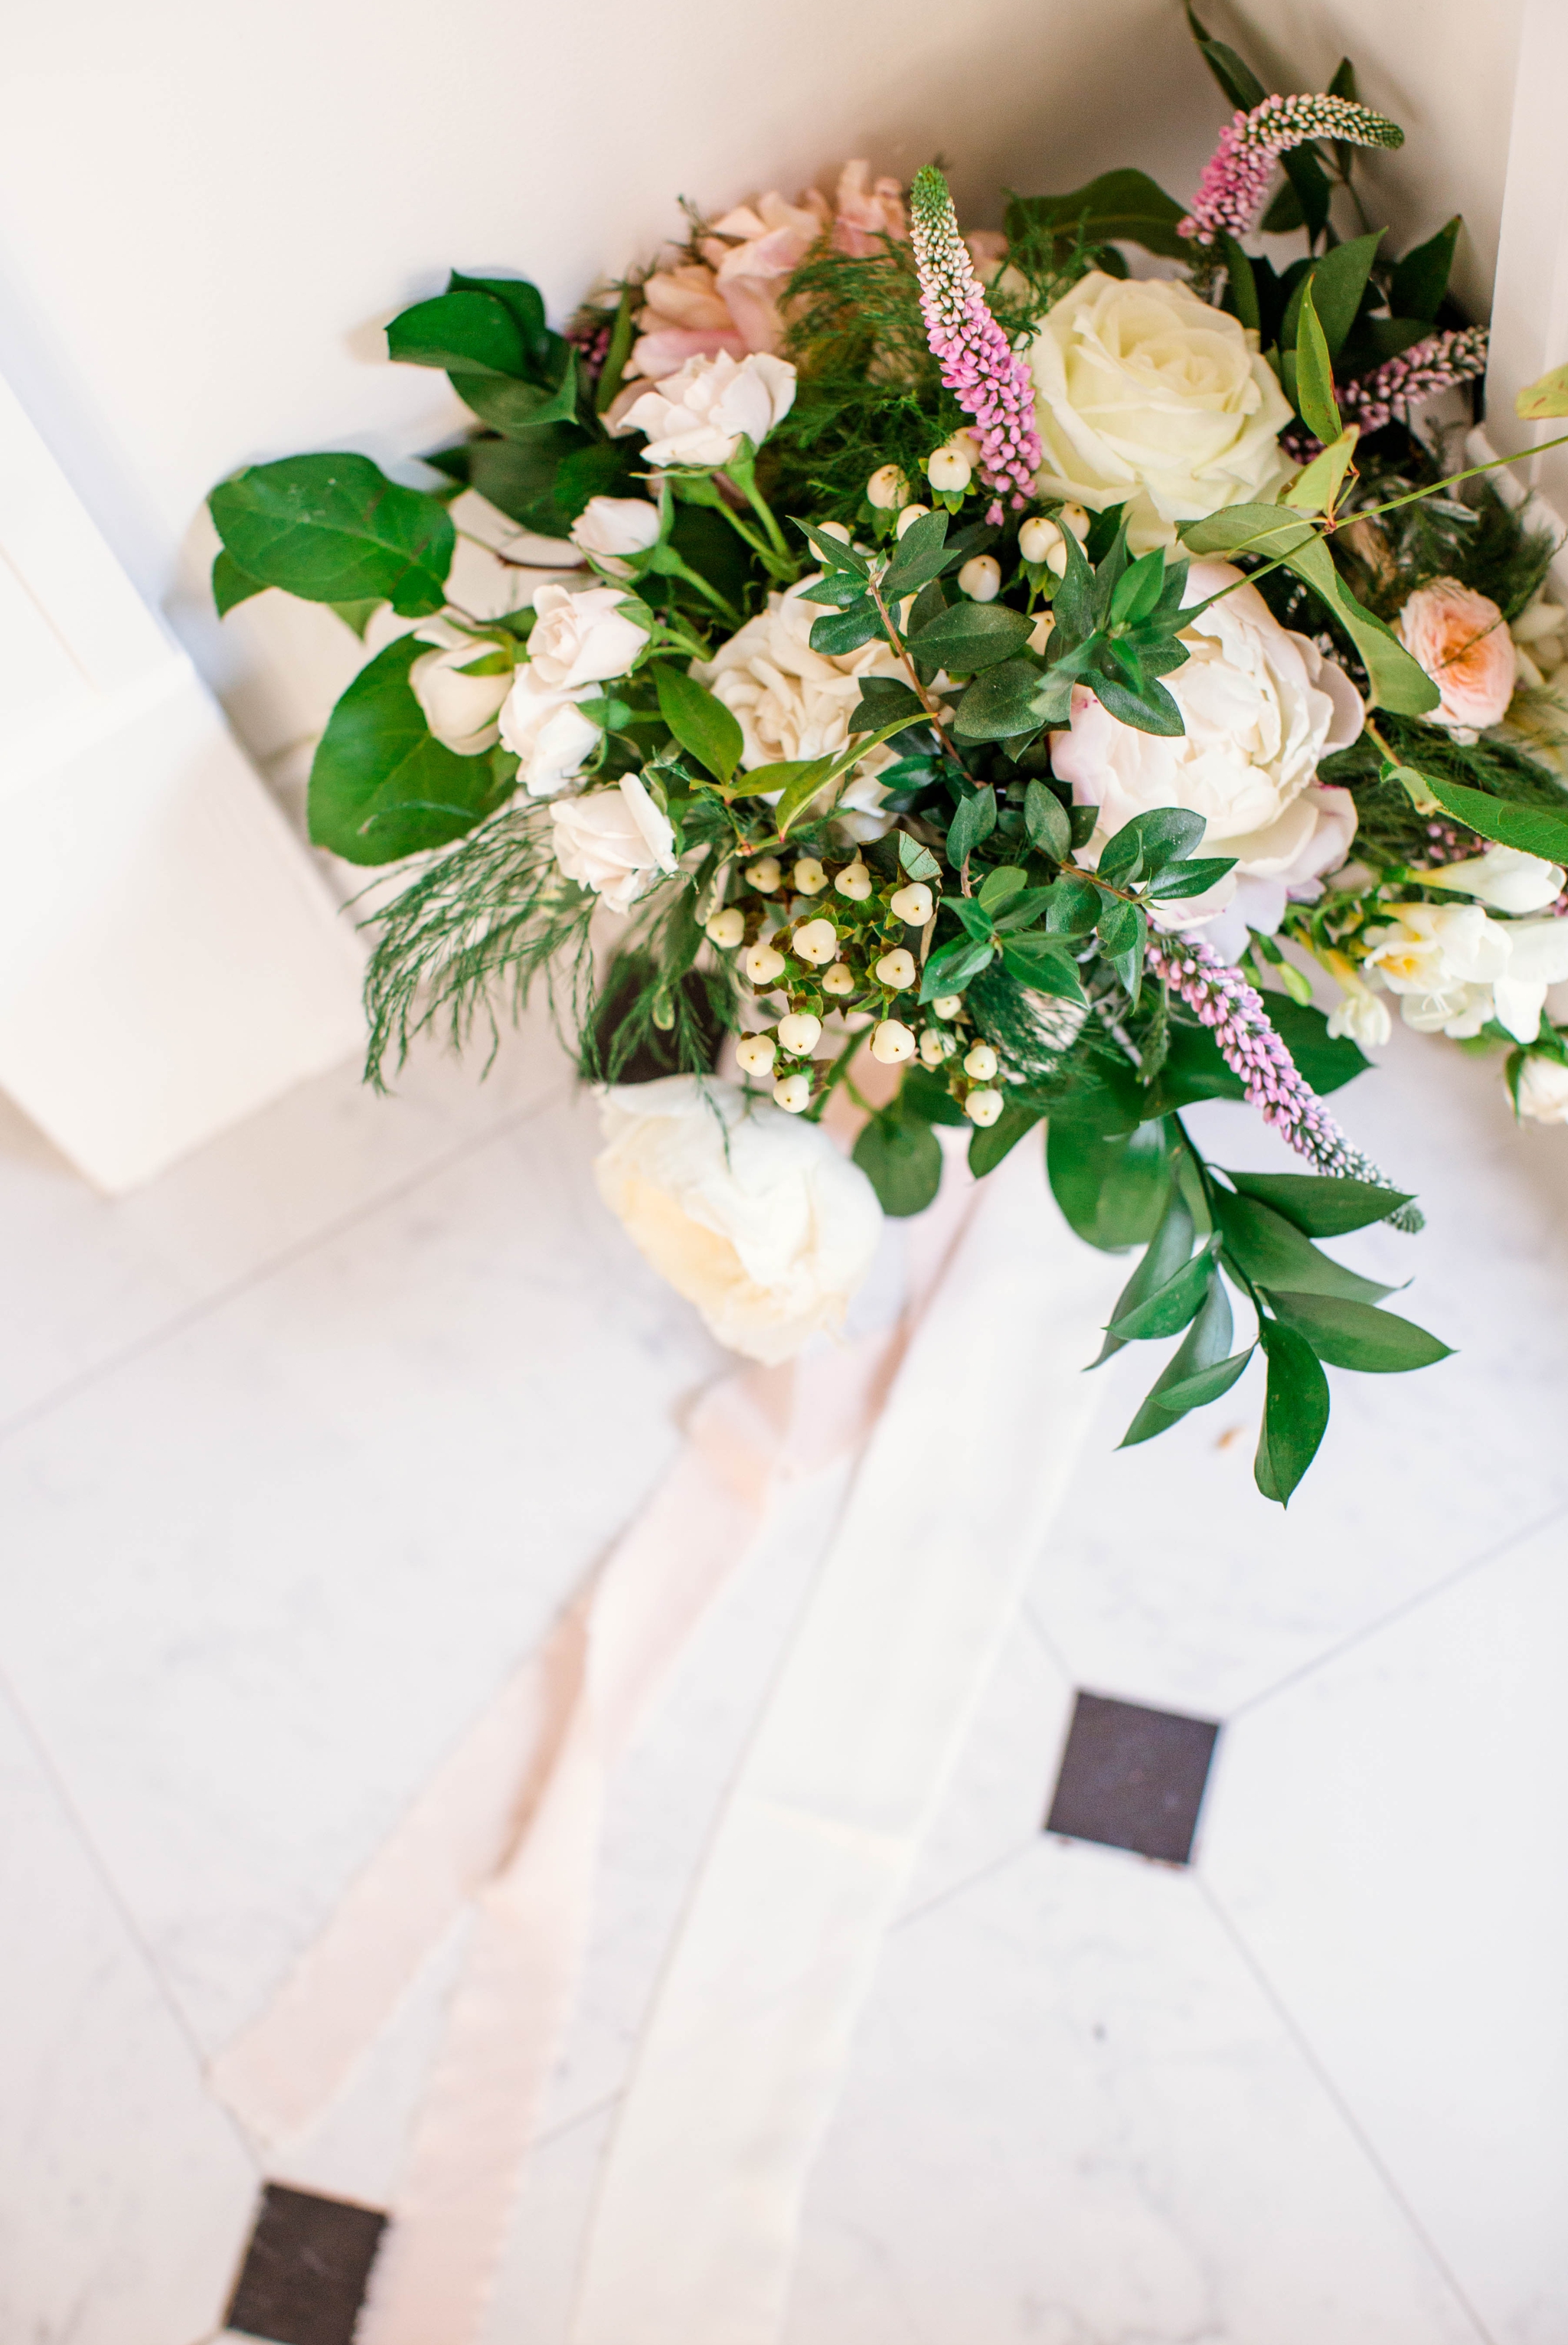  Bridal Bouquet with greenery and white flowers and paste tones on a black and white marble floor - Fine Art Wedding Photographer in Honolulu, Oahu, Hawaii - edited with the for the love of film presets by jose villa  